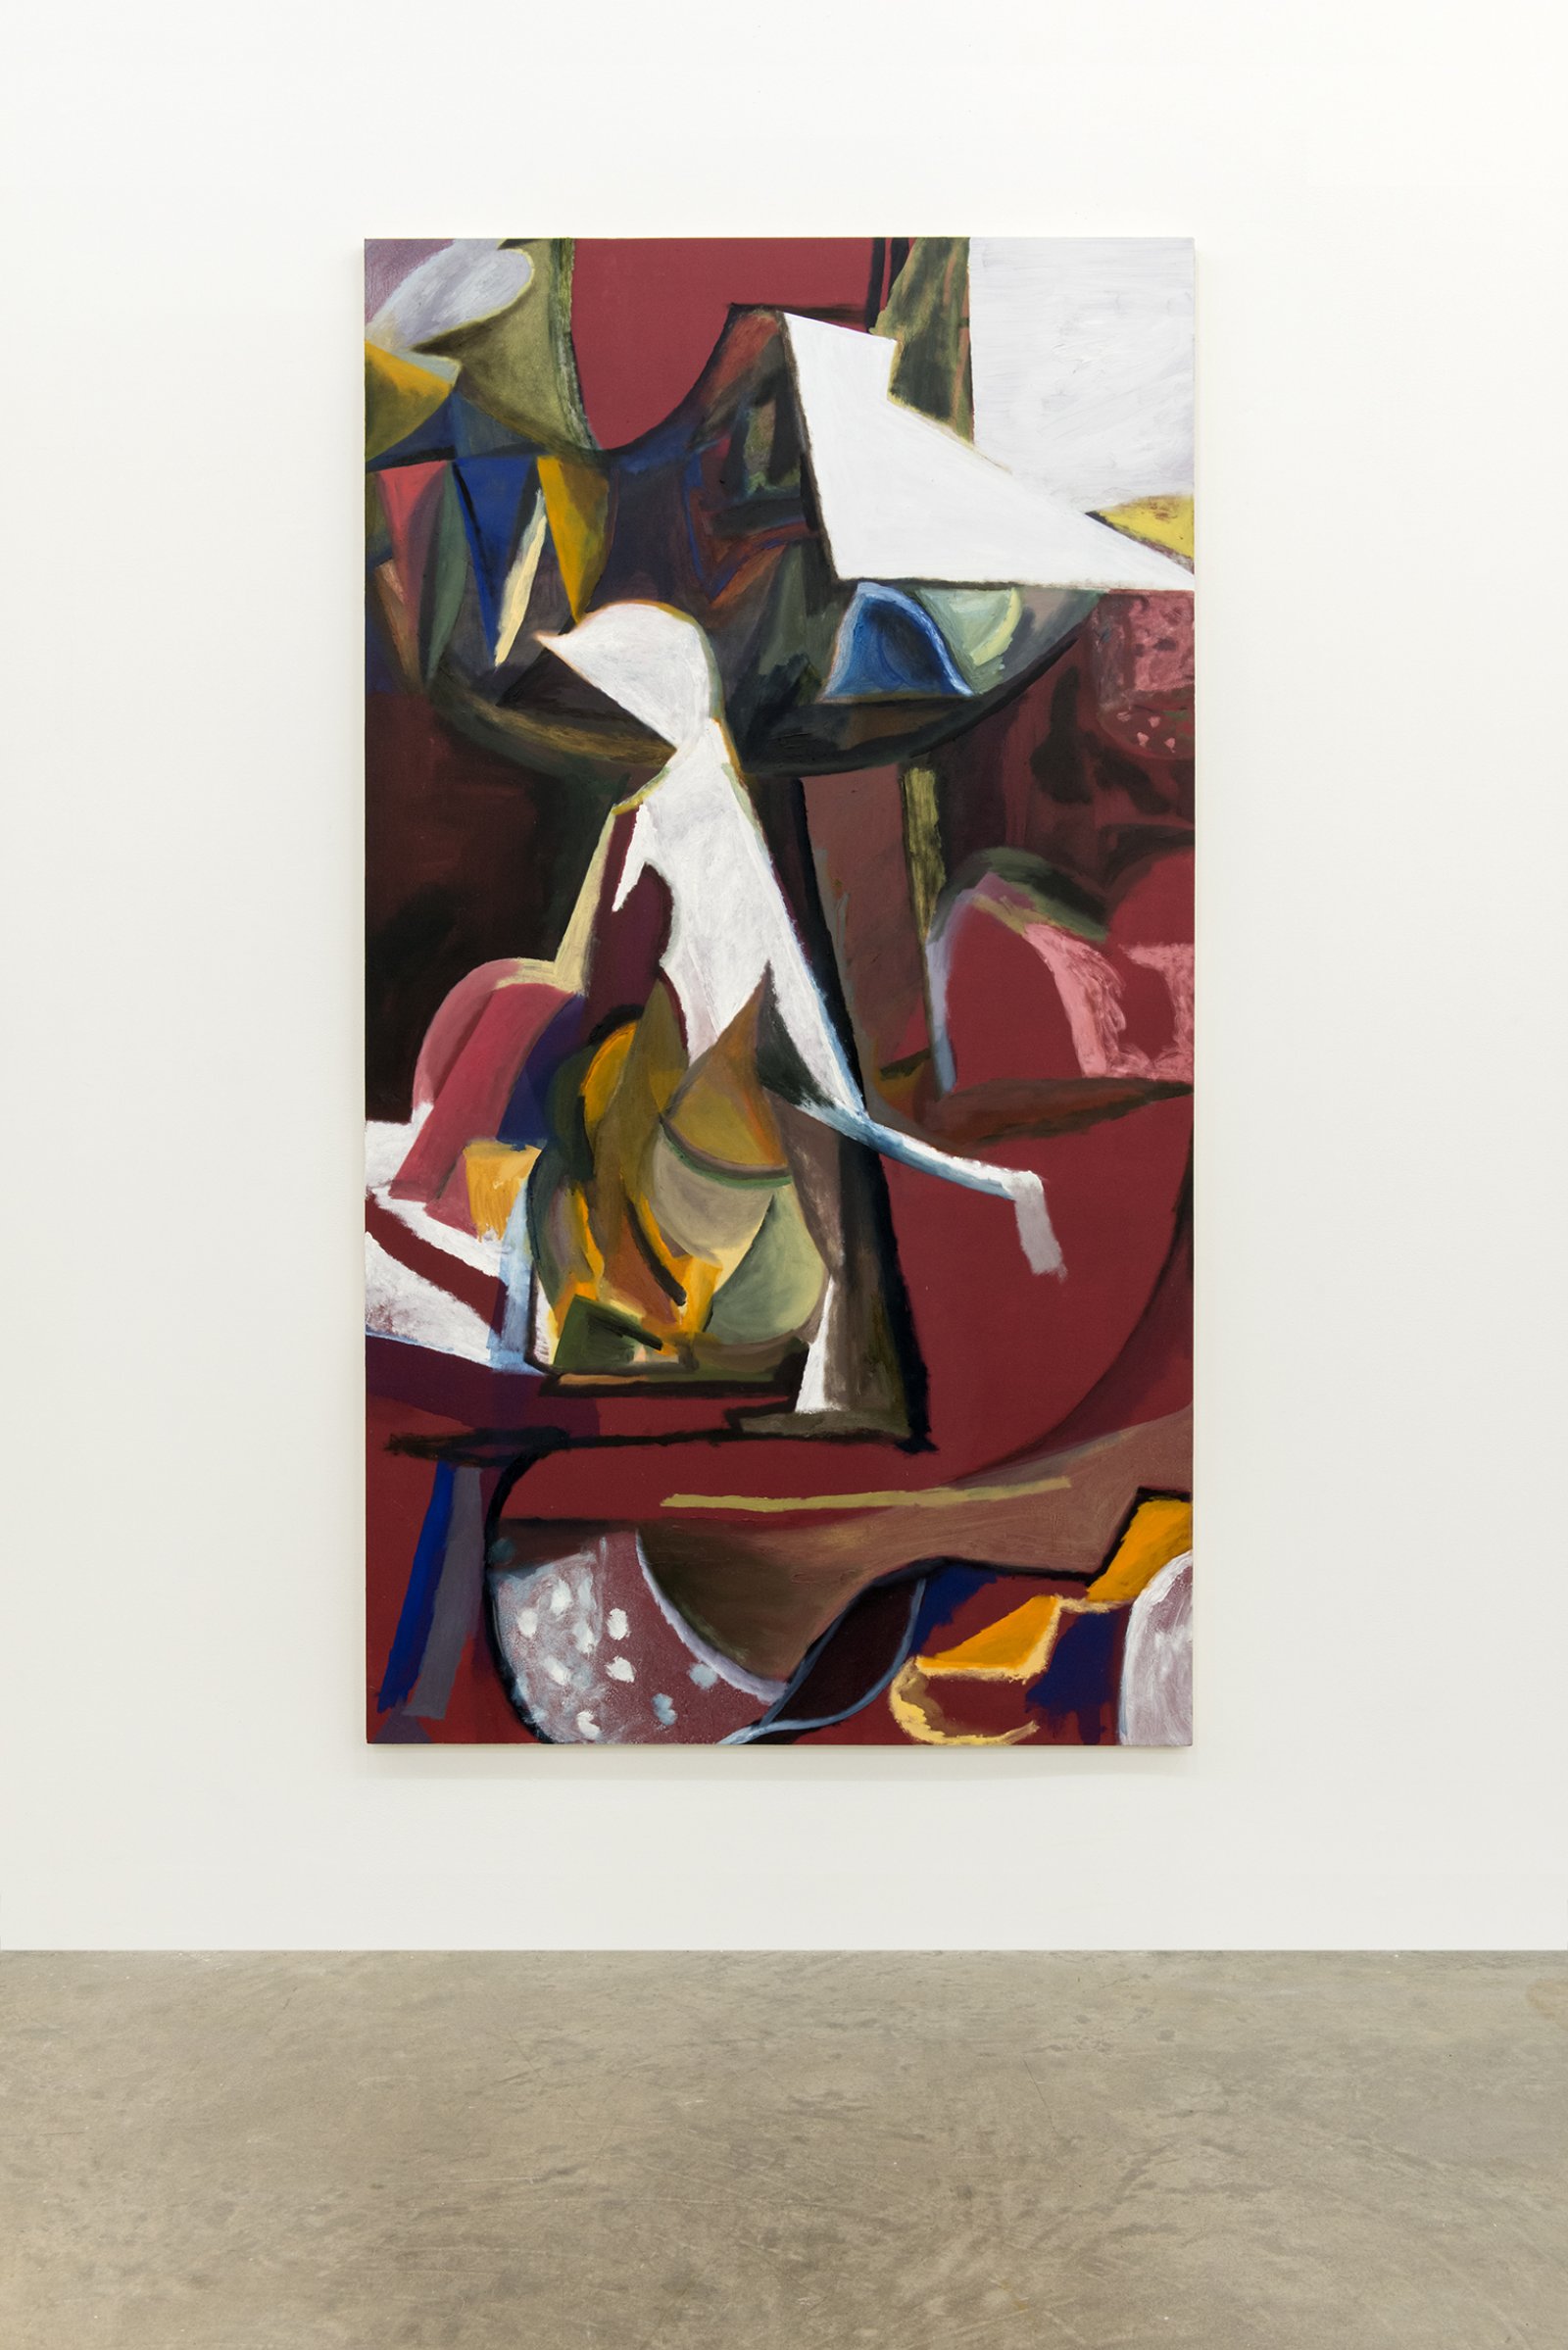 Rebecca Brewer, Passion Play, 2014, oil on panel, 84 x 46 in. (214 x 117 cm) by Rebecca Brewer